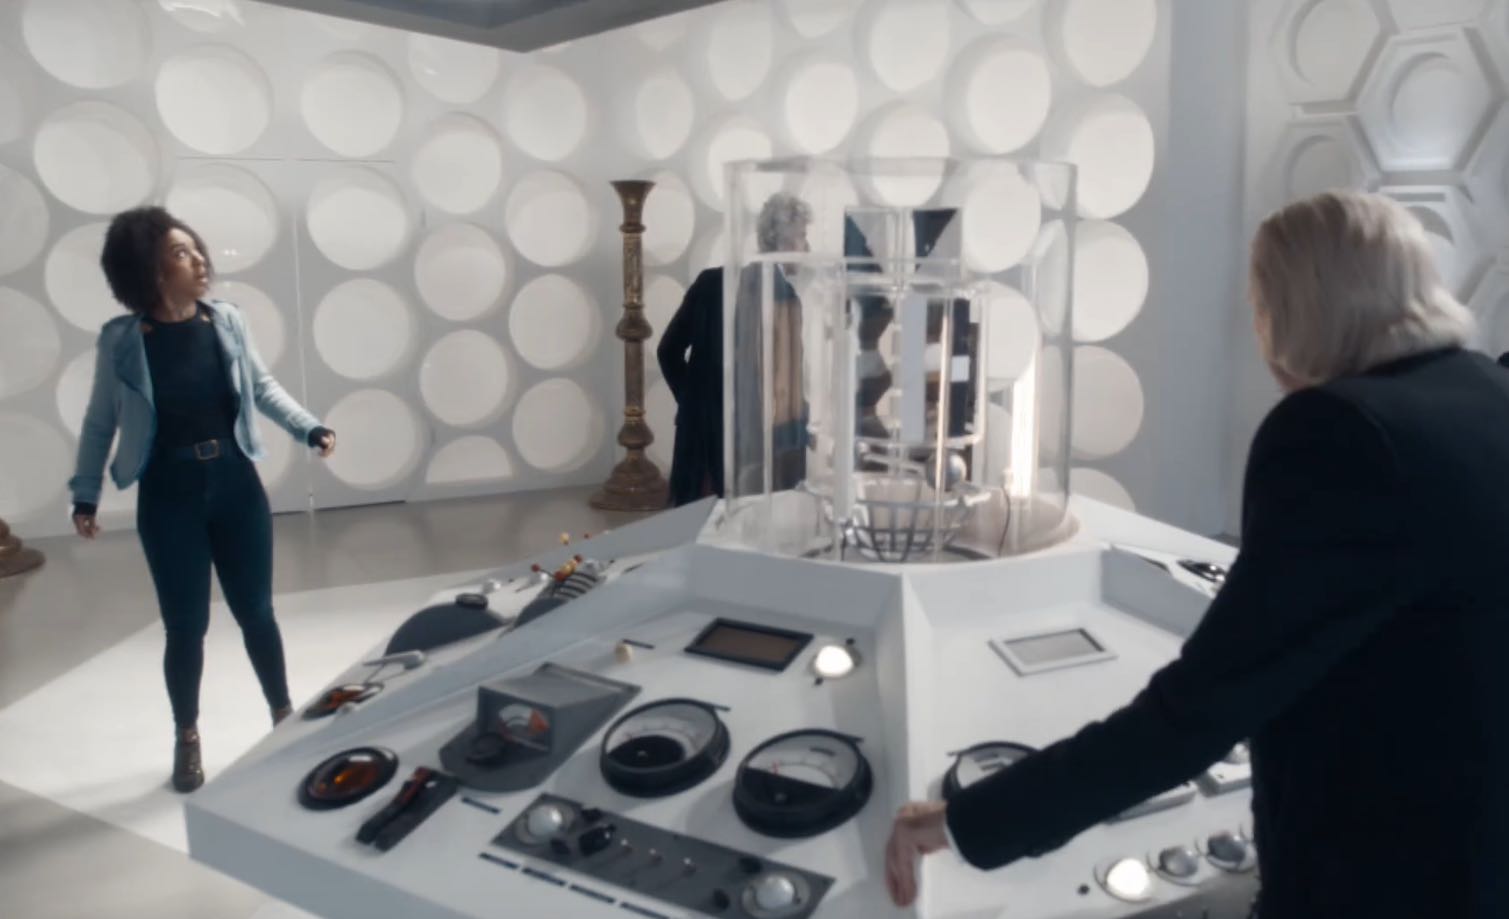 Bill comes aboard the First Doctor's TARDIS. (TV: Twice Upon a Time [+]Loading...["Twice Upon a Time (TV story)"])